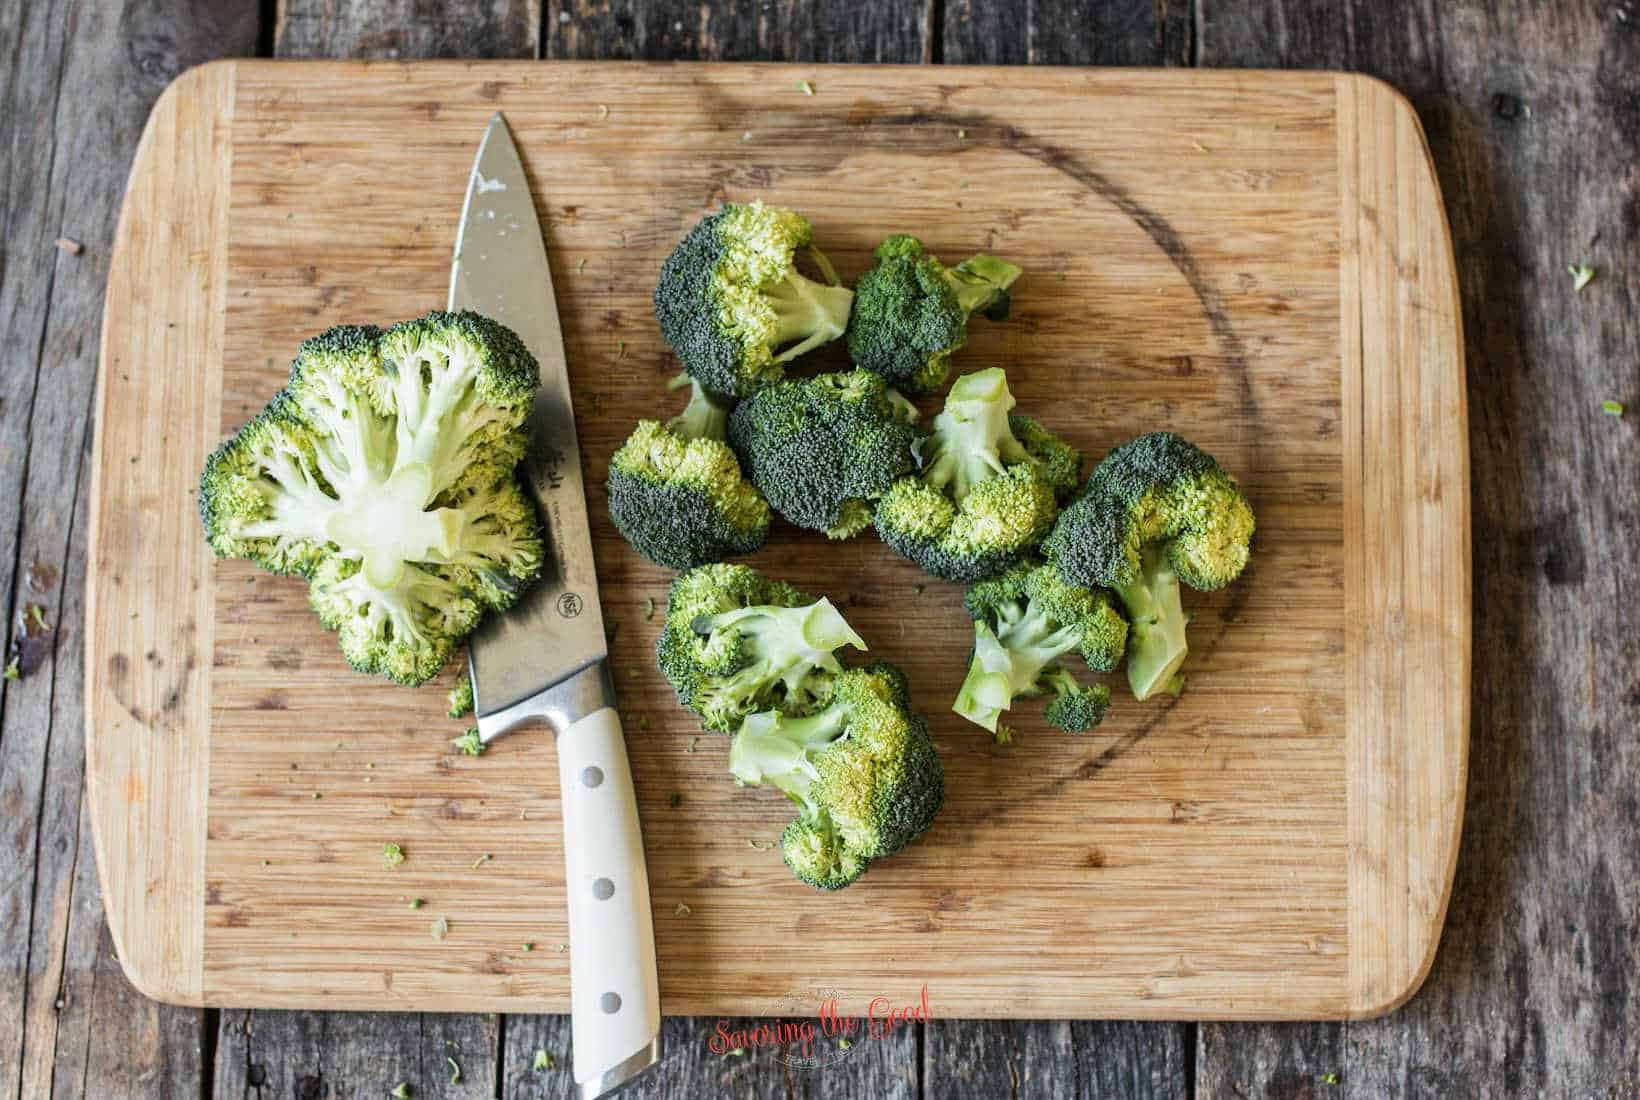 crown of broccoli with a chef knife, broccoli flourettes on the side